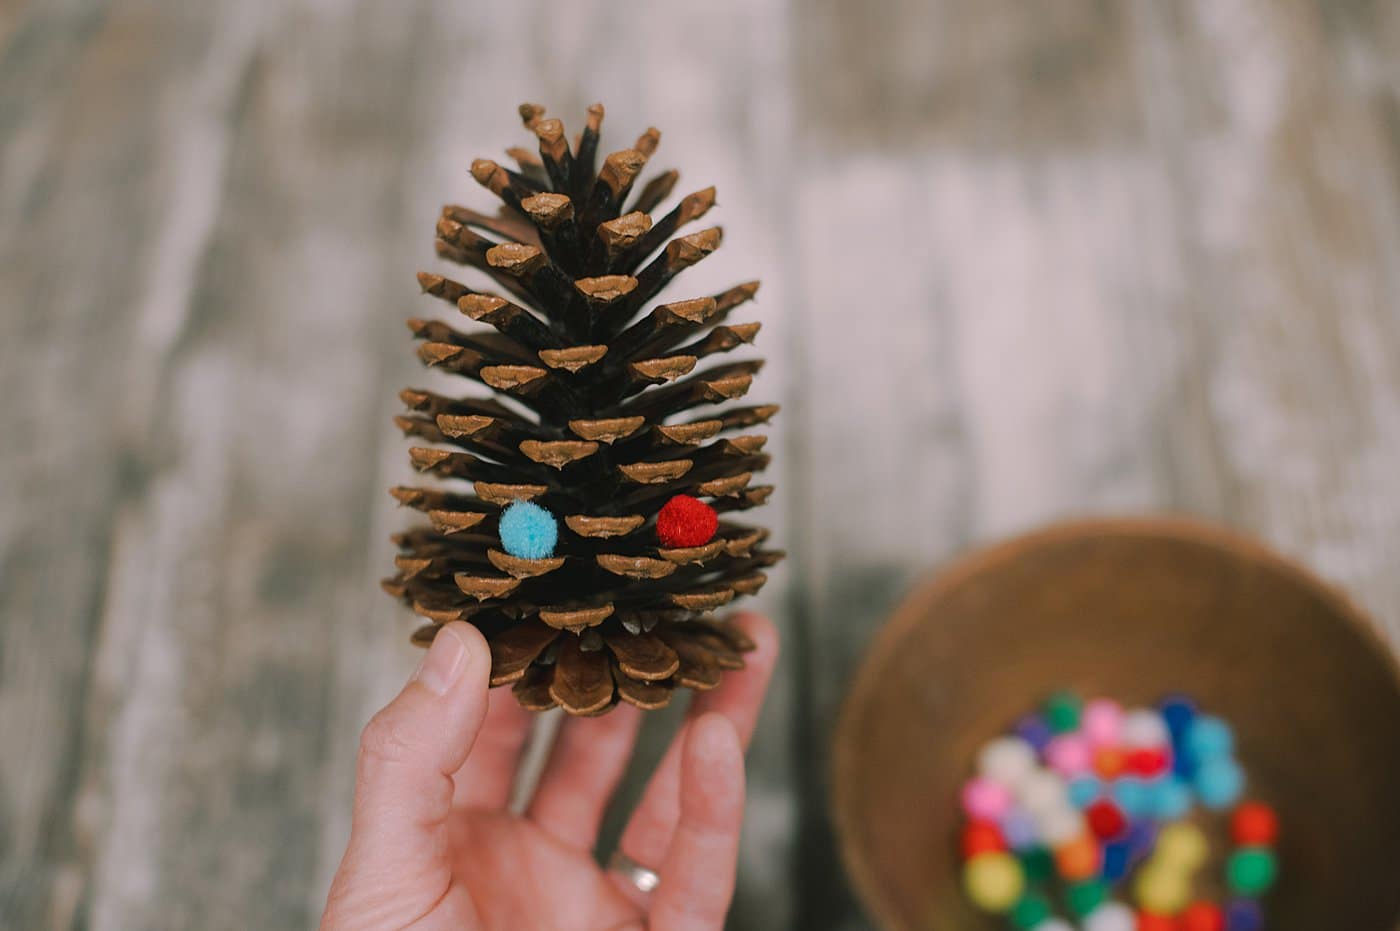 Hot glue pompoms to the ends of the pinecone.